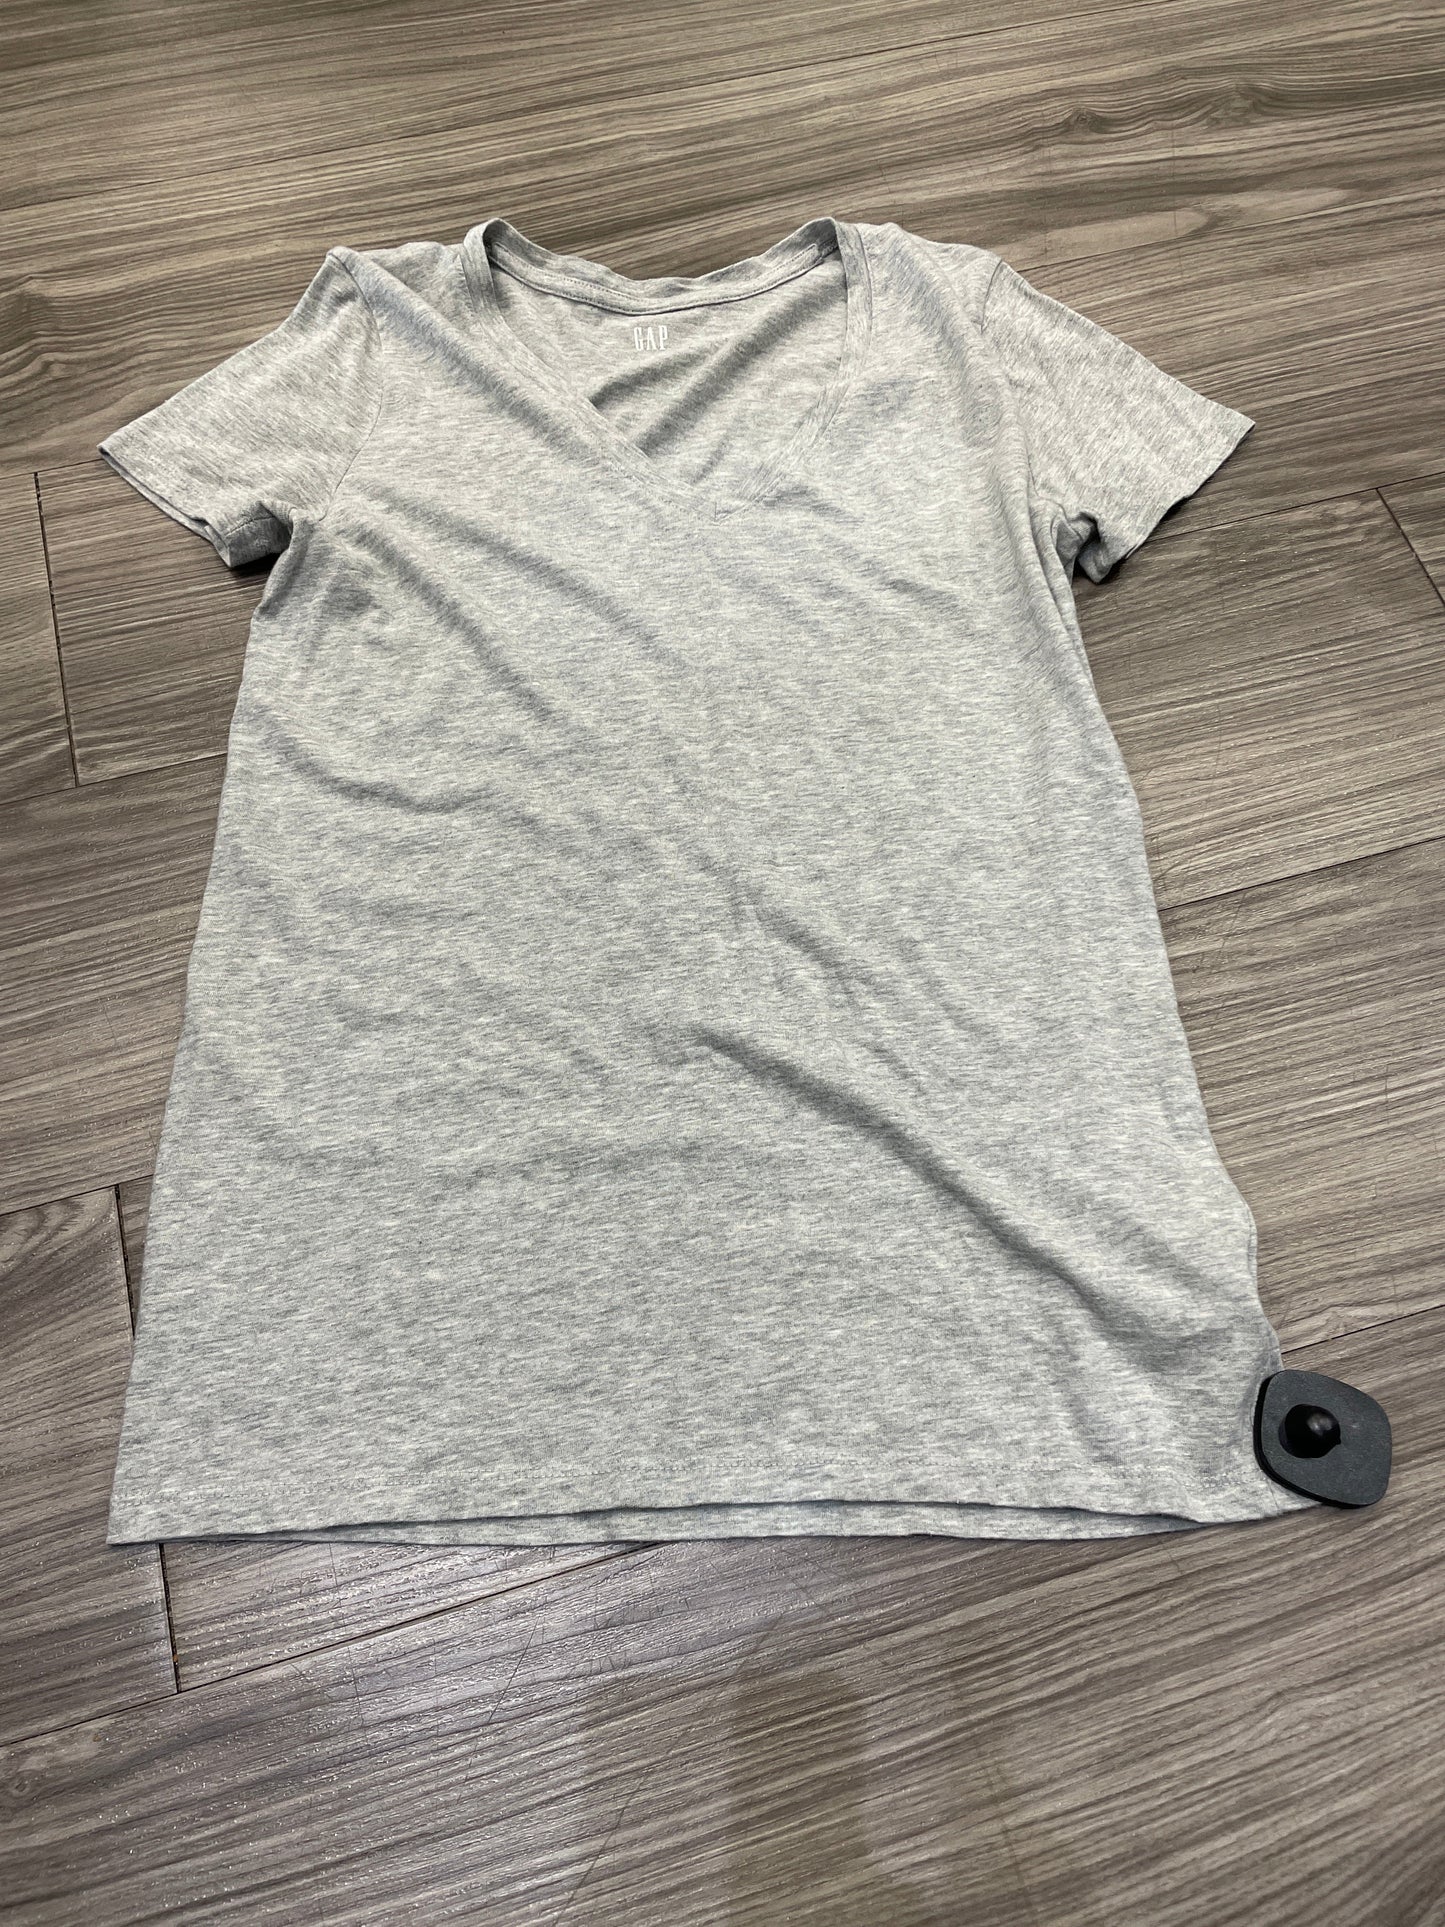 Top Short Sleeve By Gap  Size: S